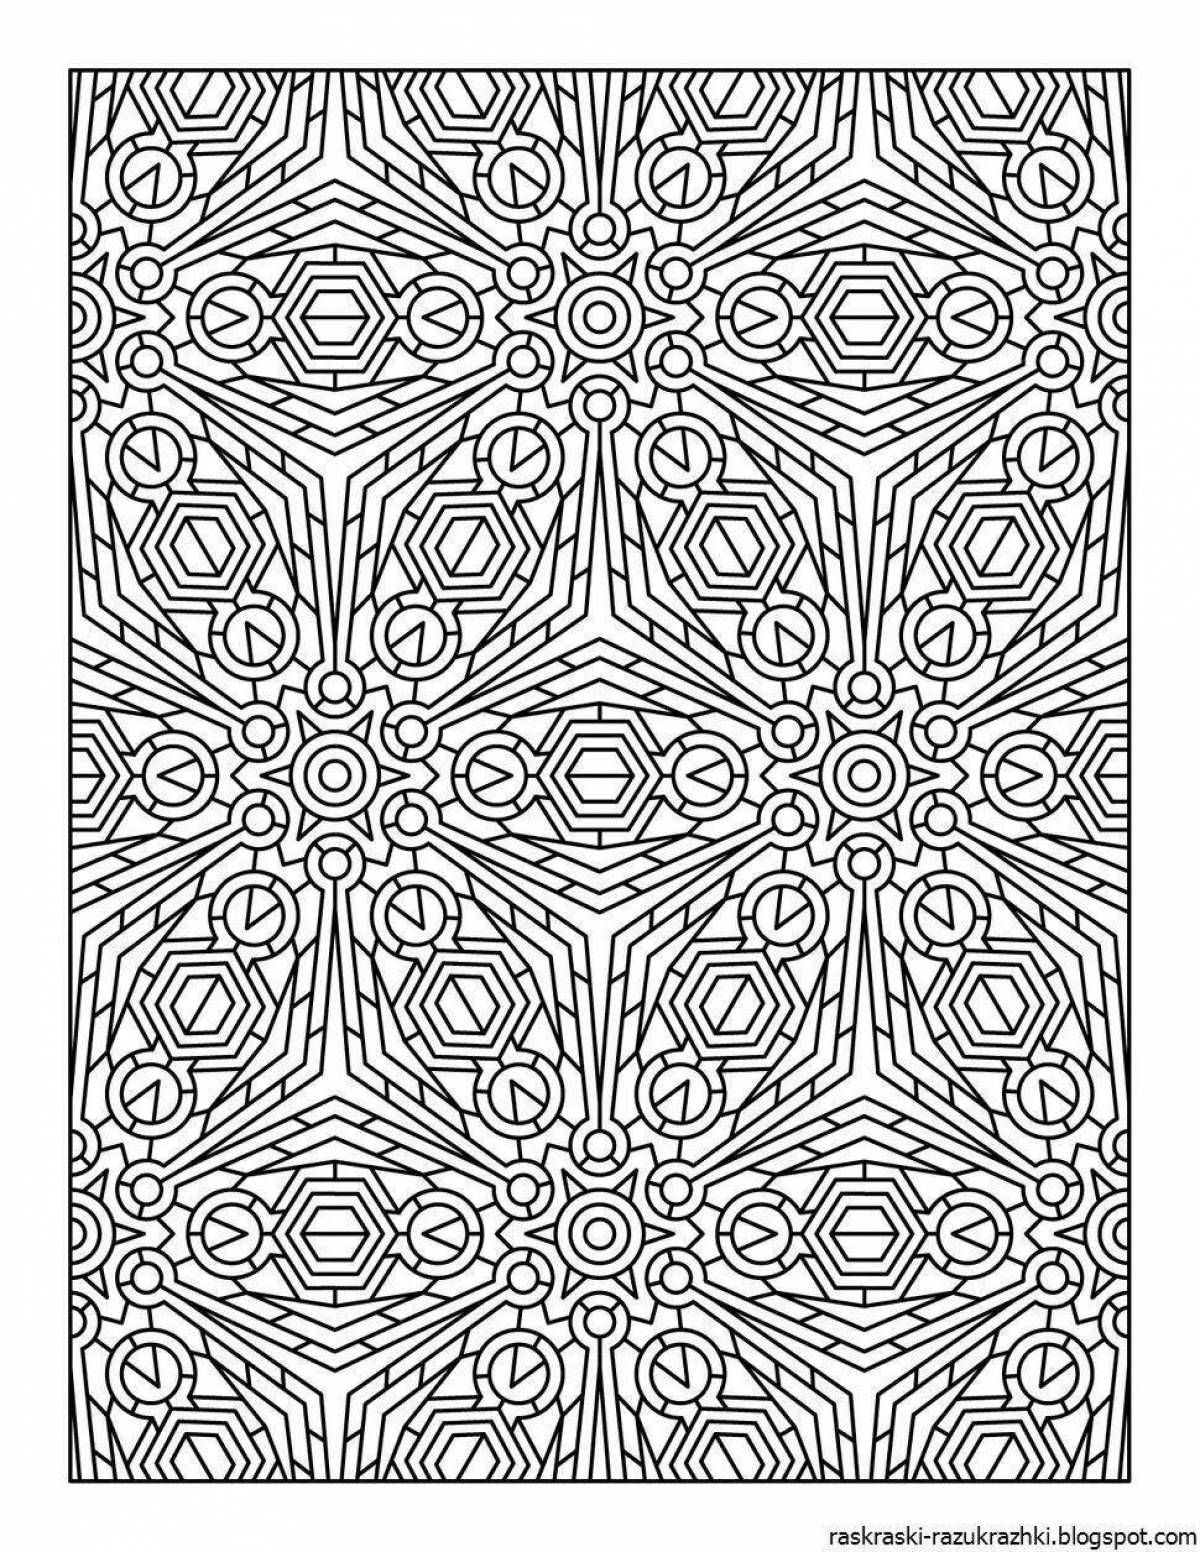 Coloring book intricate patterns - gracefully